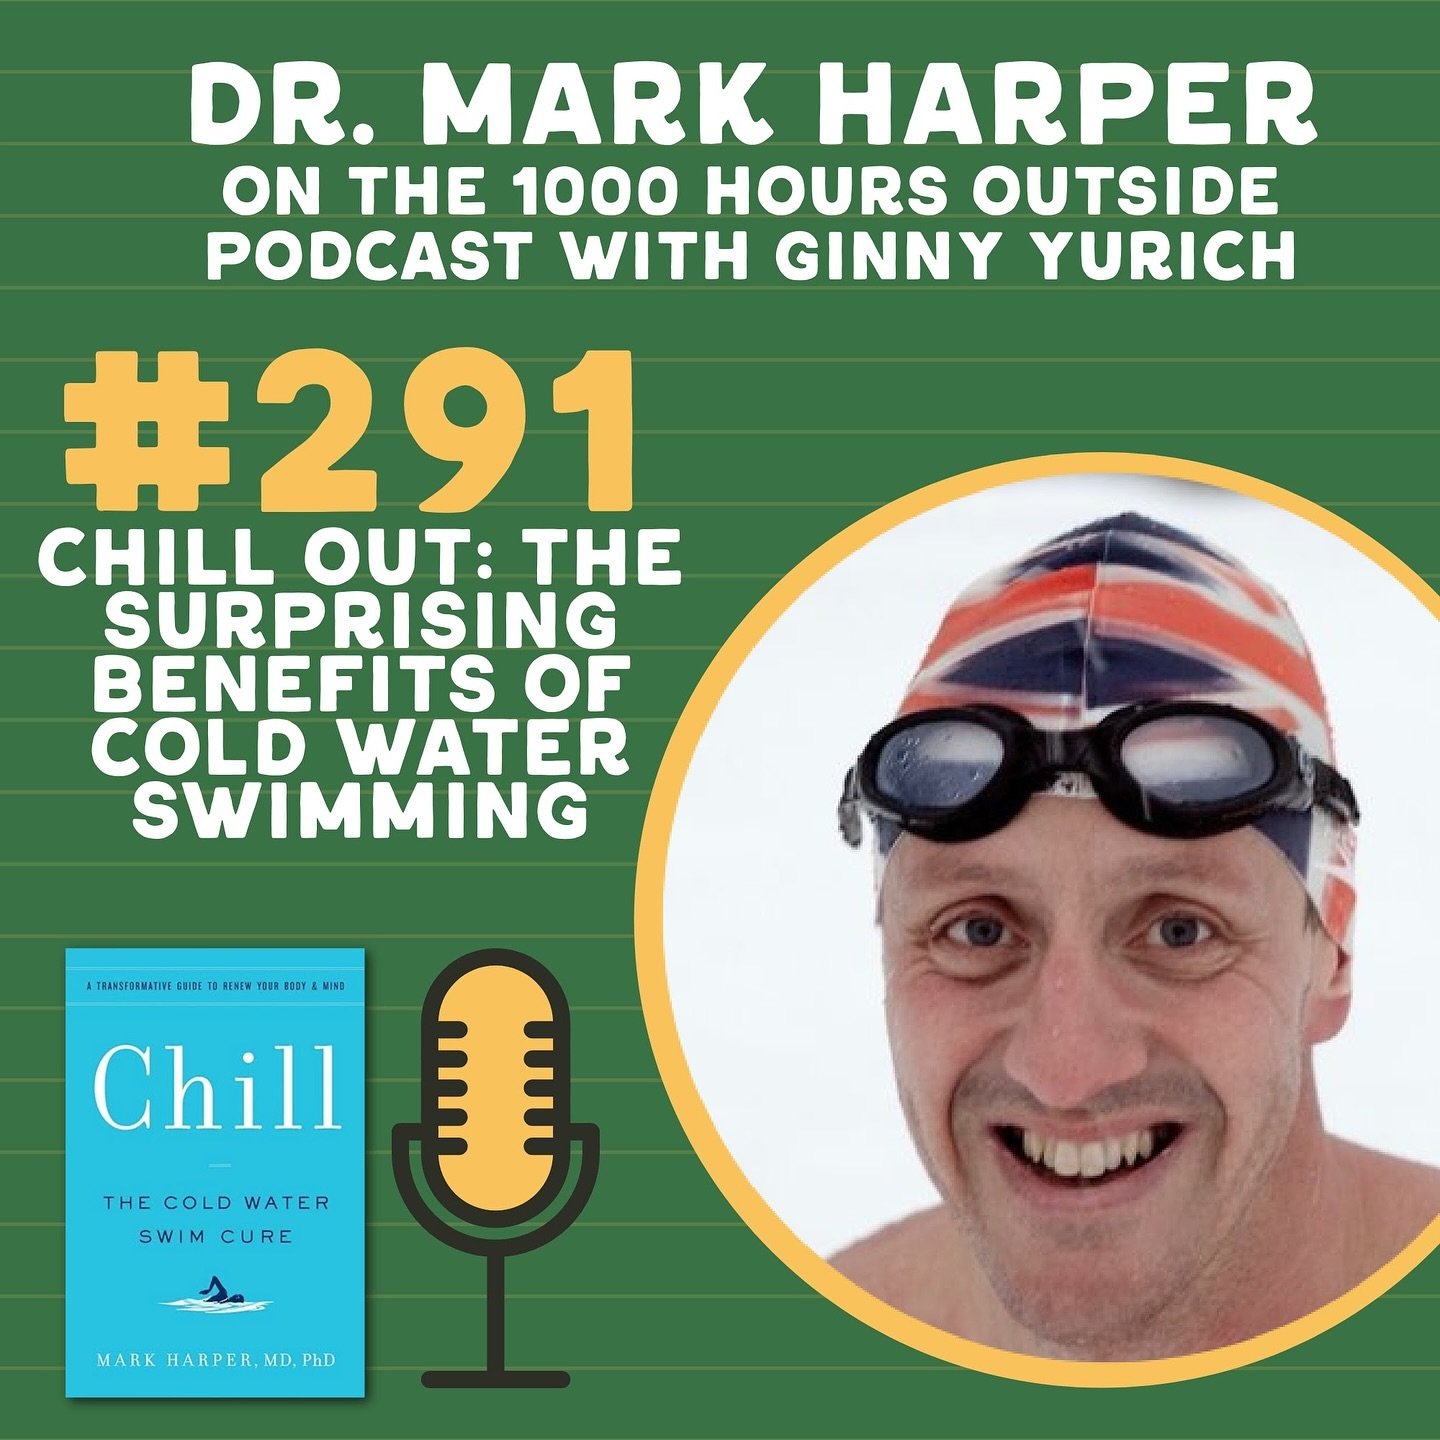 Do you want all your stresses and worries to float away?! Listen in to what Dr. Mark Harper has to share!!

Pick a favorite quote ➡️ and add it to your stories. I like the one about how when you put your face in the water you turn into the best versi